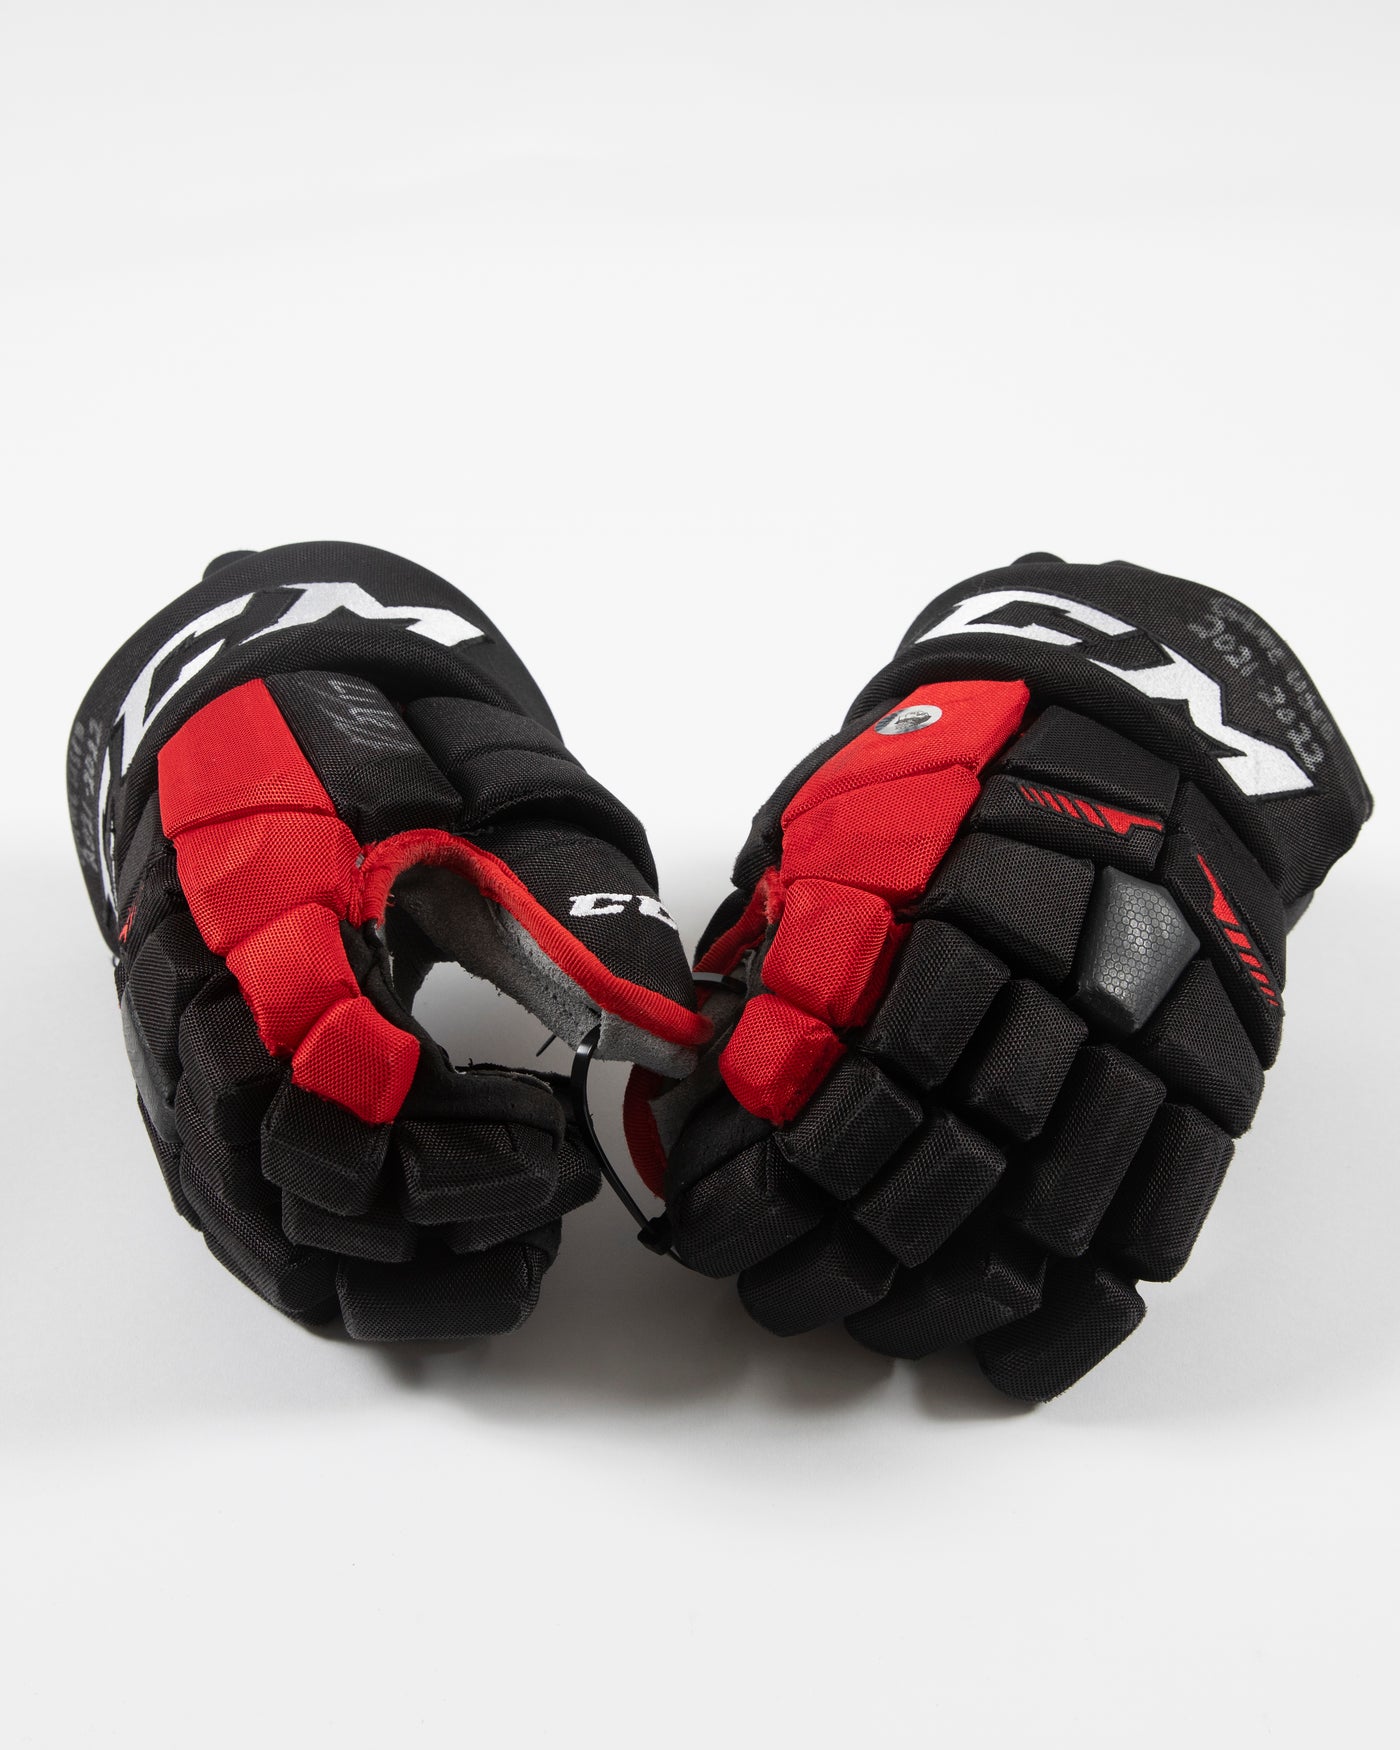 Autographed Chicago Blackhawks CCM Dylan Strome game used hockey gloves - both gloves